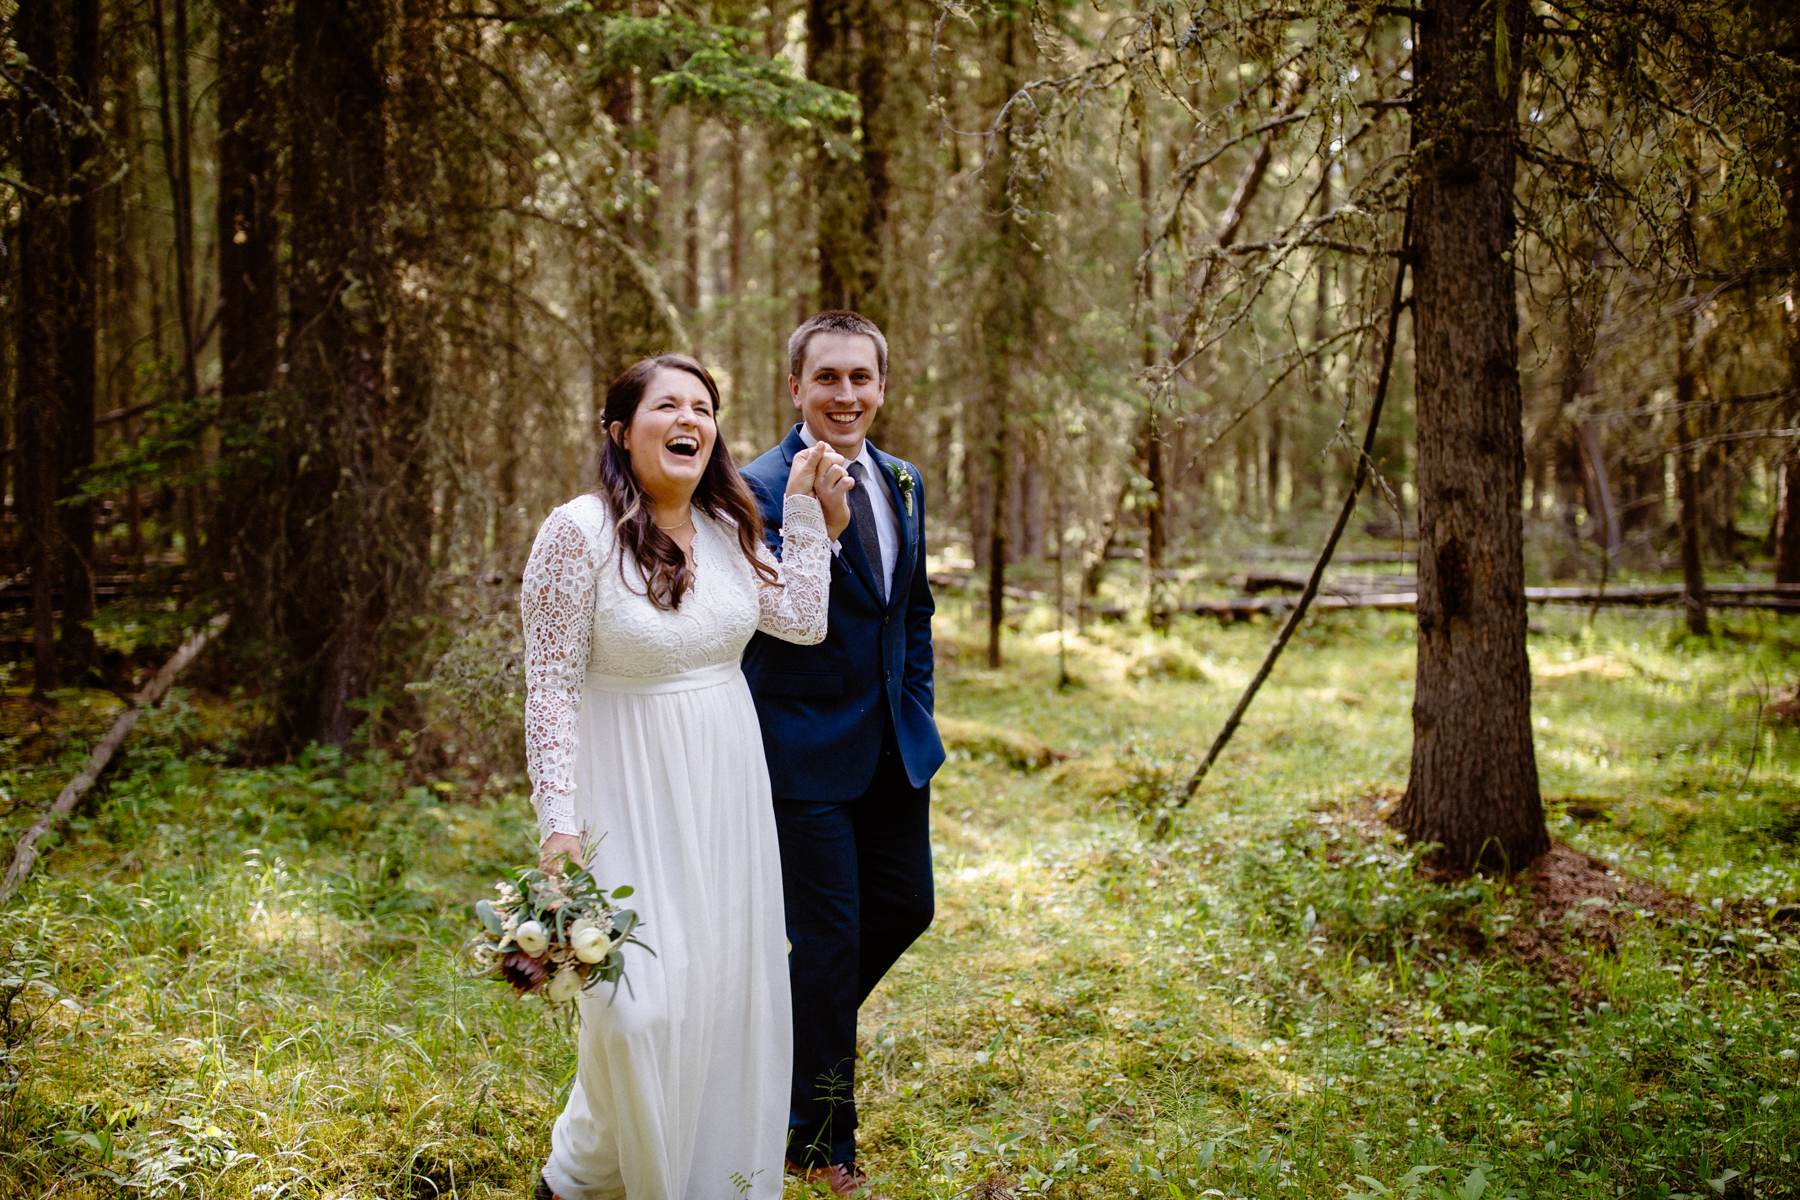 Vow Renewal Photography in Banff - Image 14